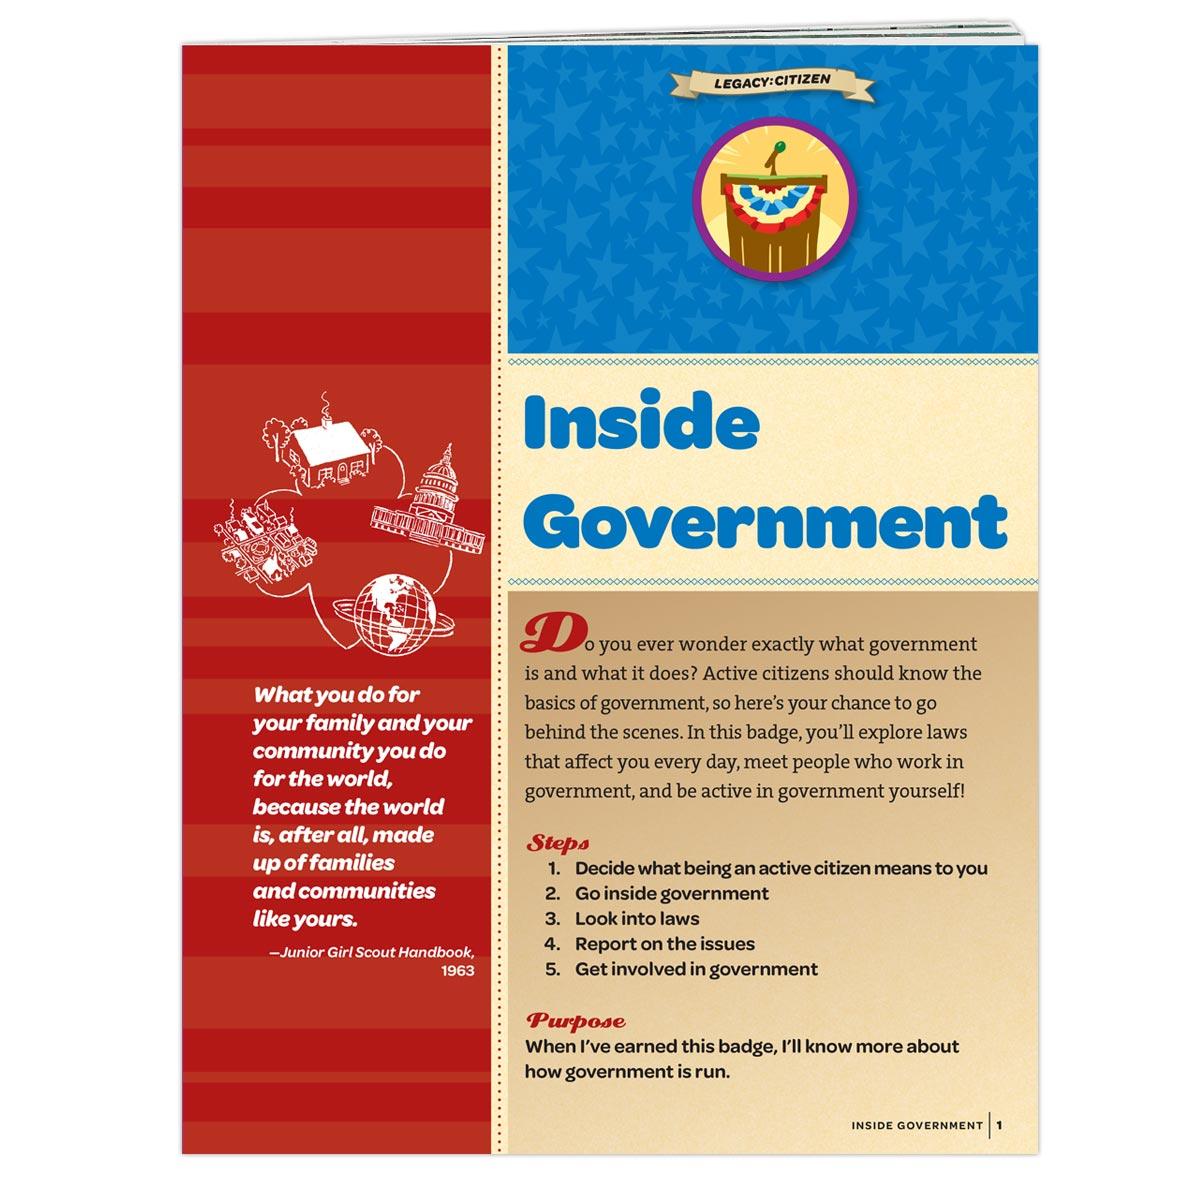 Inside Government Badge Requirements